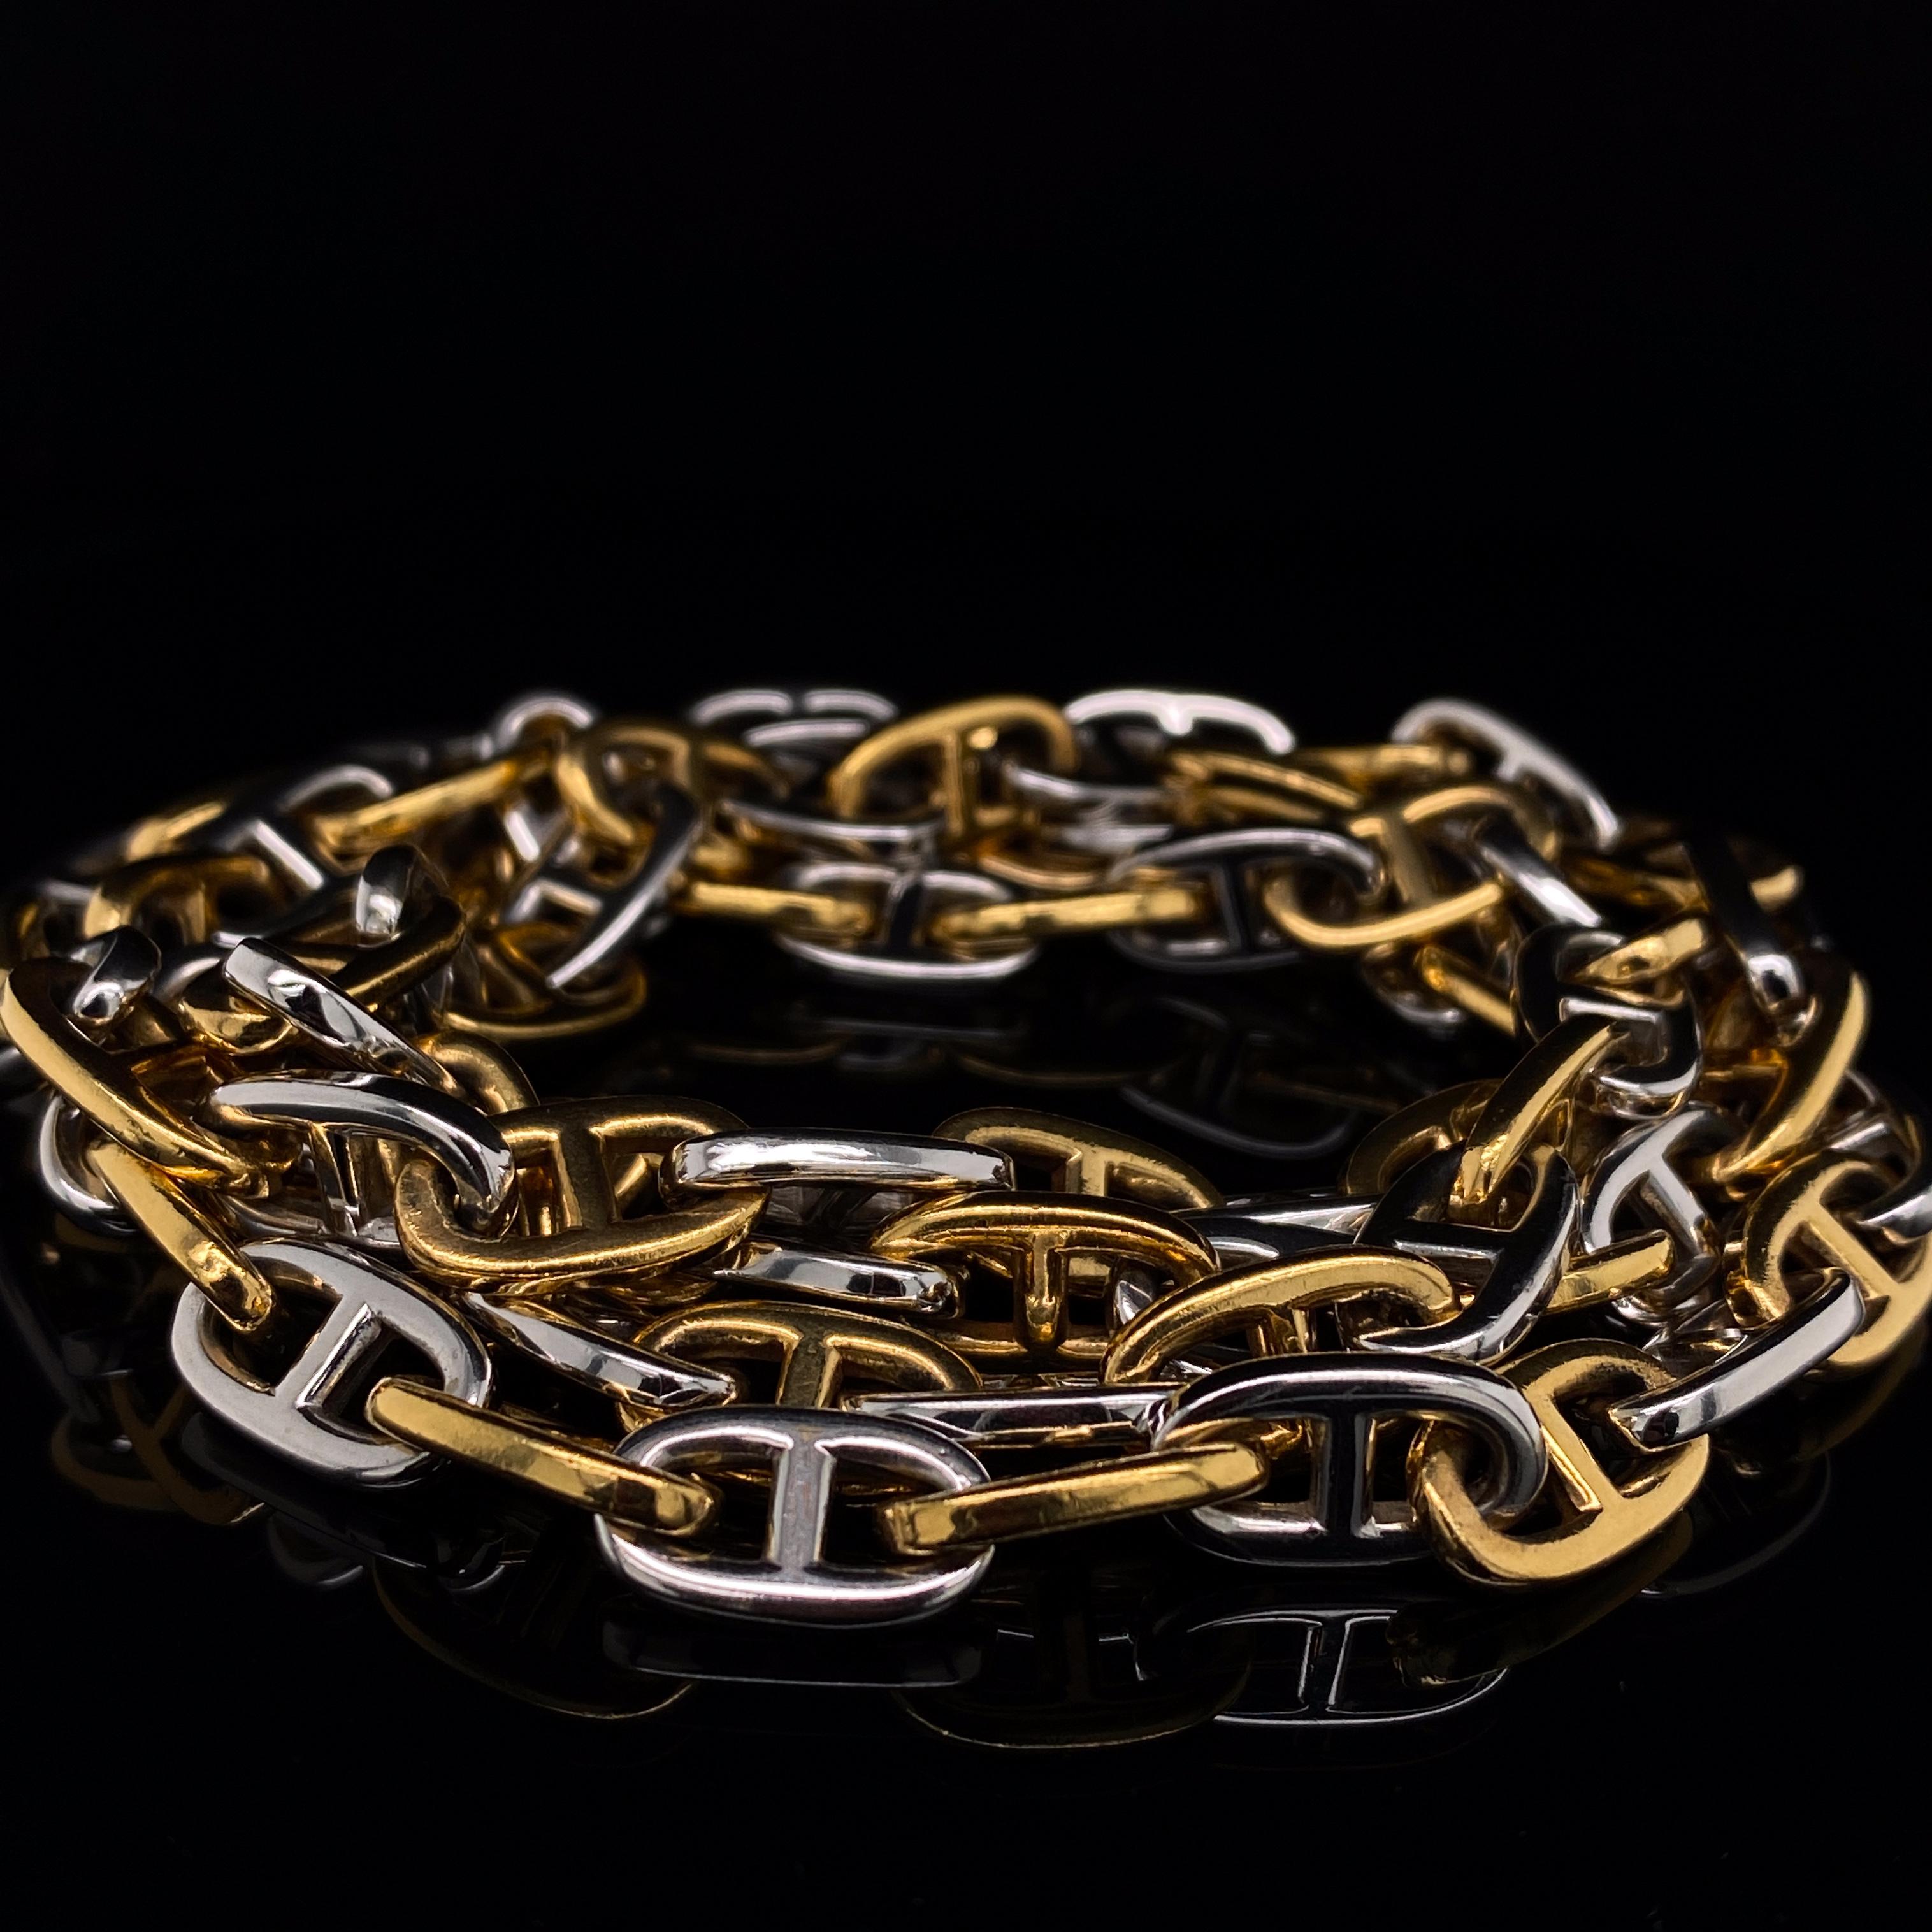 An Hermès Chaîne d'Ancre 18 karat Yellow and White Gold necklace circa 1950.

This iconic Hermès necklace is an extra-specially long length of 32 inches, composed of polished 18 karat yellow and white gold oval links each with a bar spacer, to a